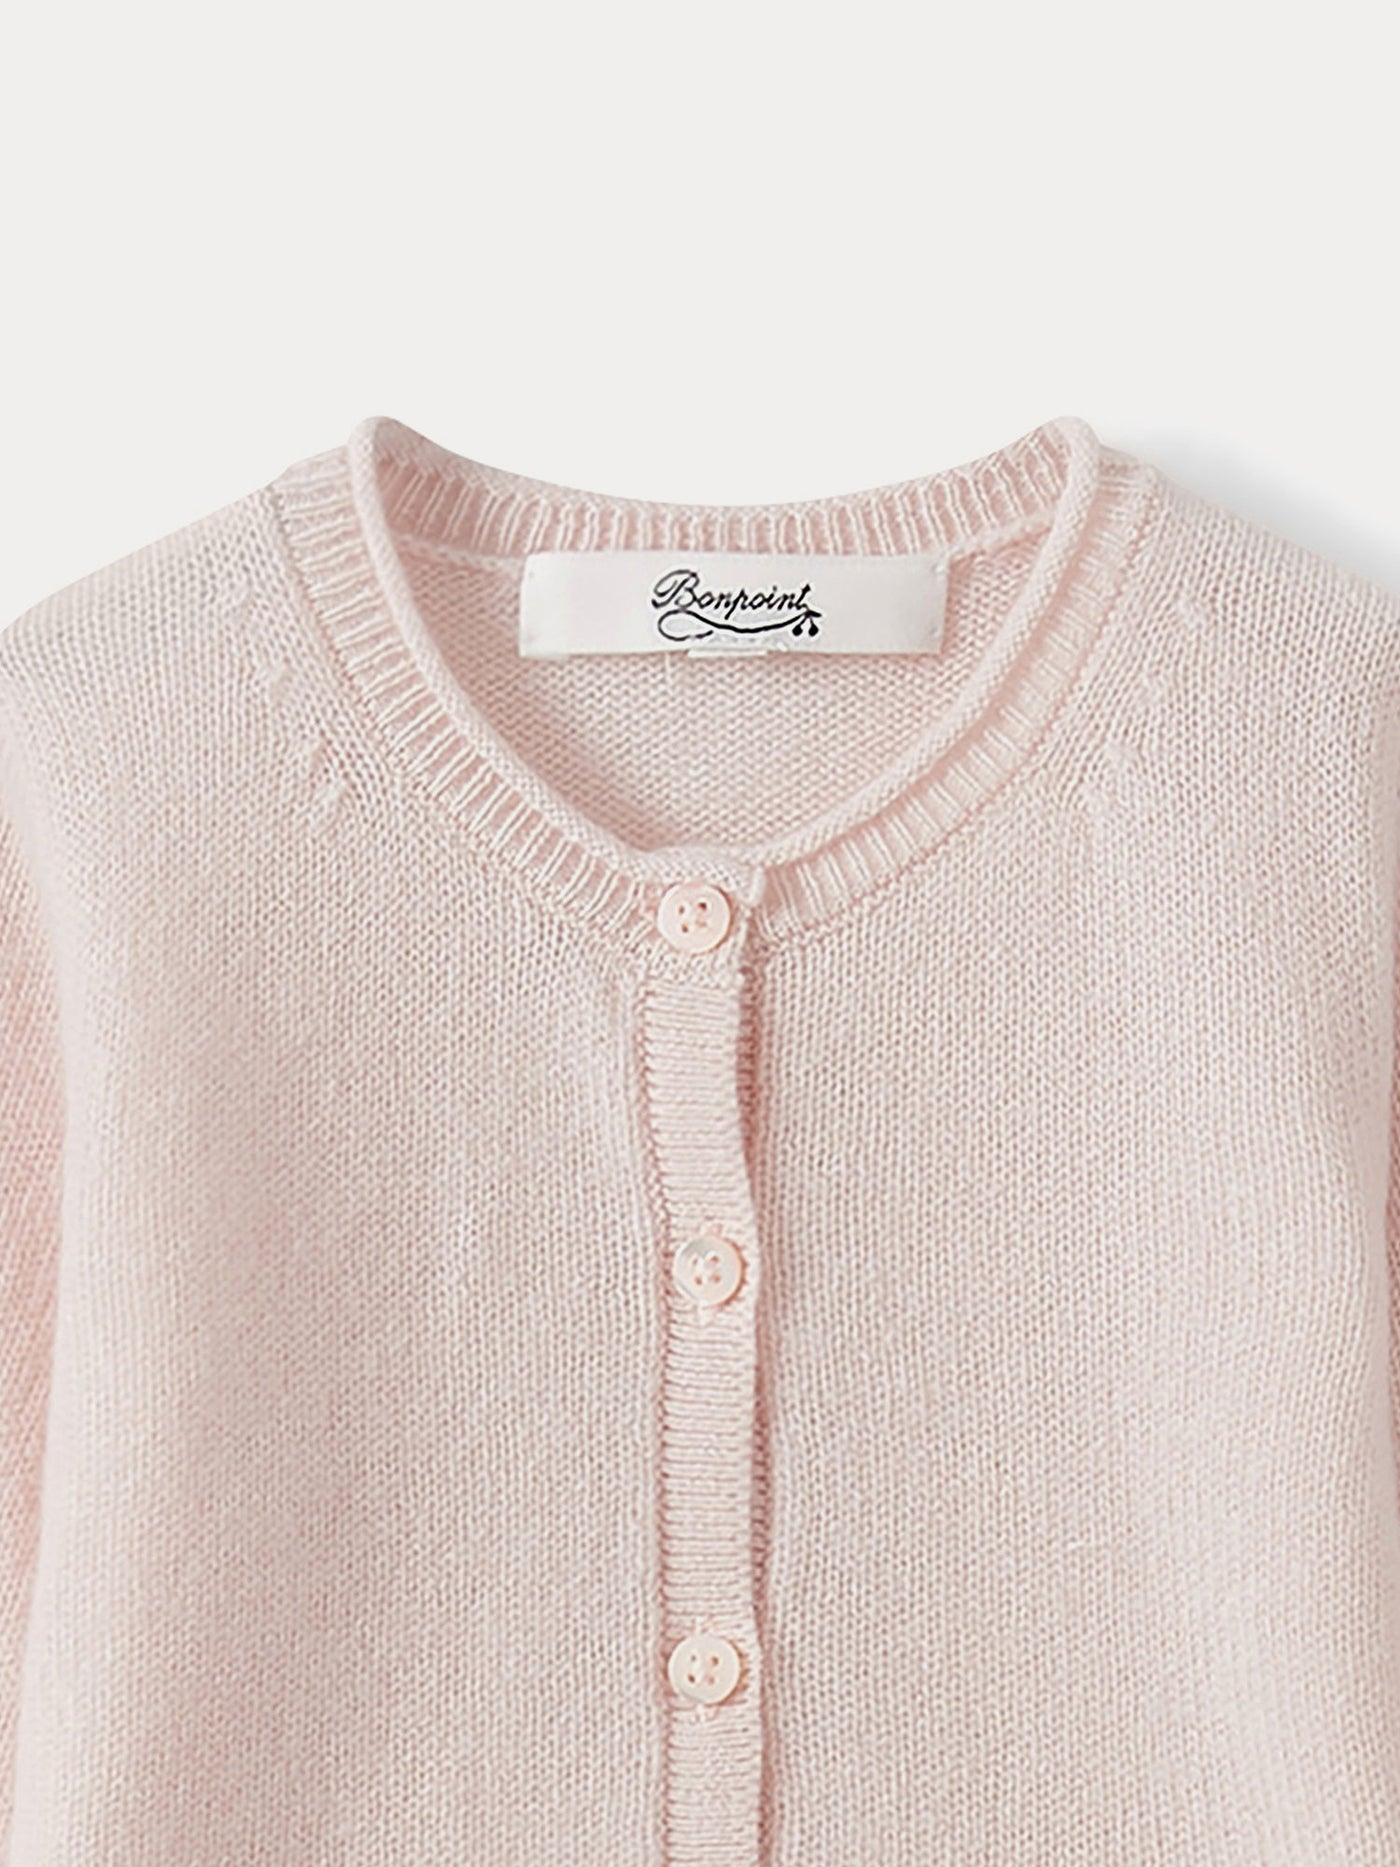 Cashmere Cardigan for Baby pale pink  newborn sweaters and cardigans •  Bonpoint